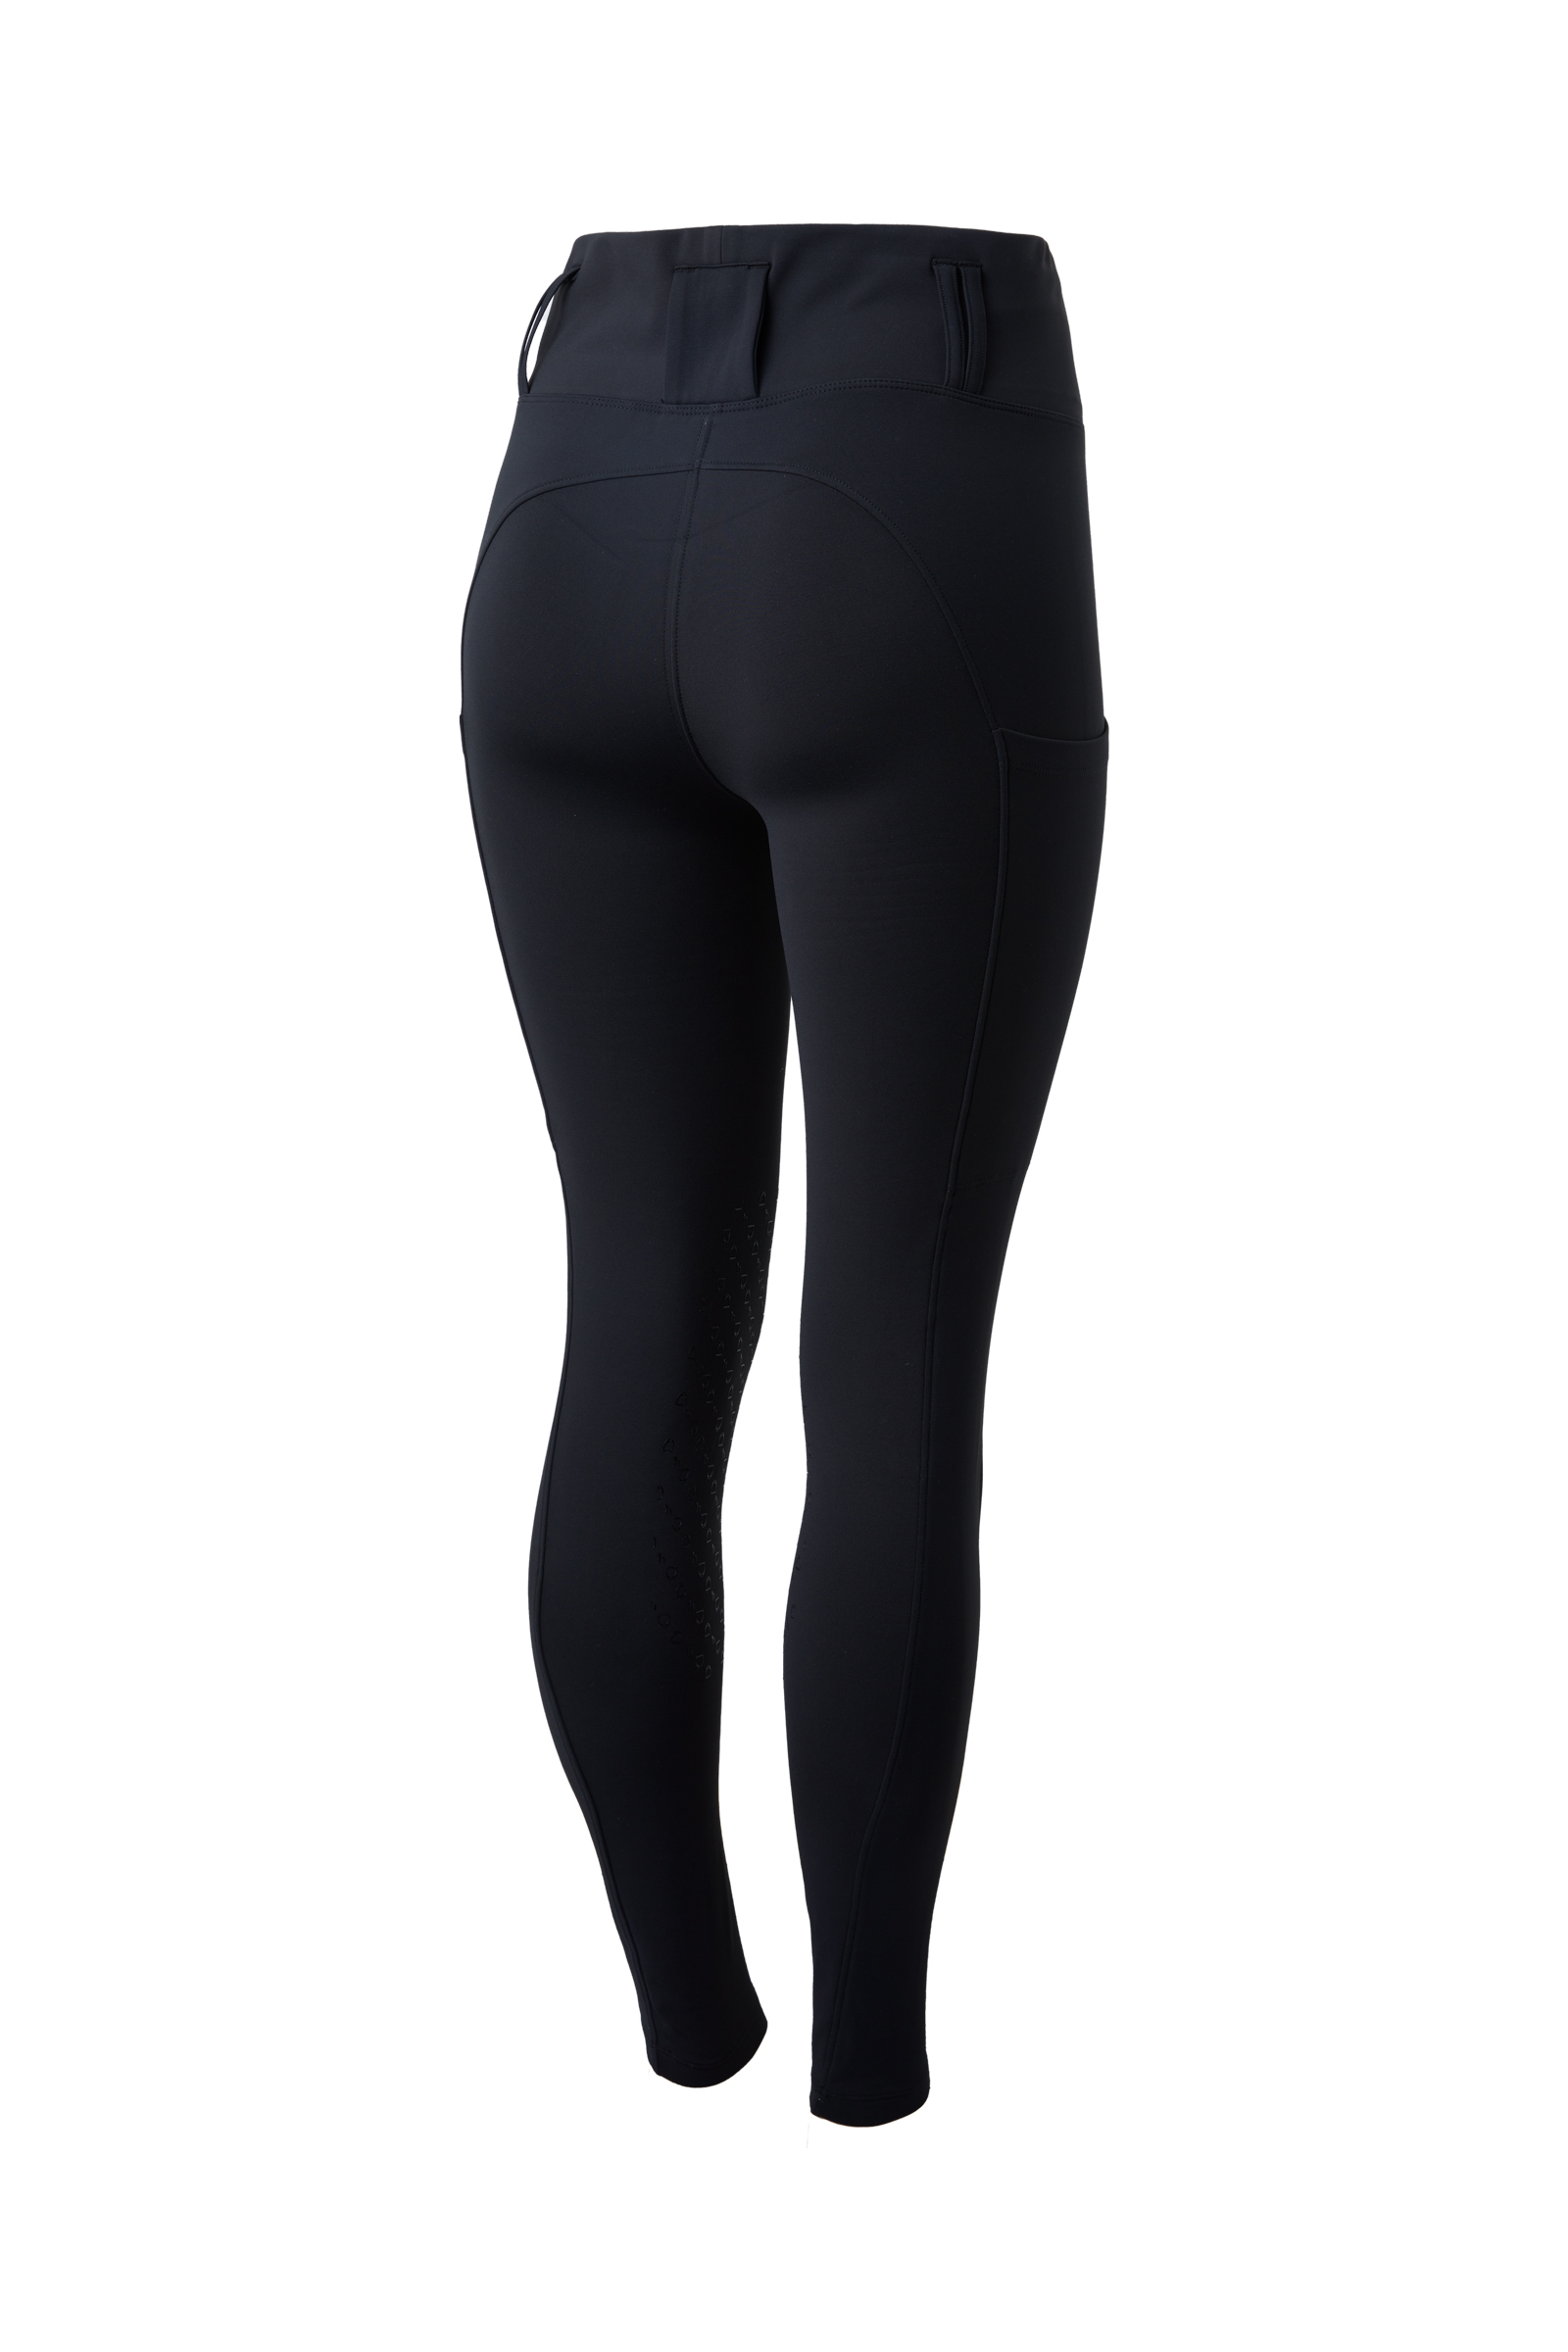 Sale Now On, Black Ladies Horse Riding Tights, Ph Pockets